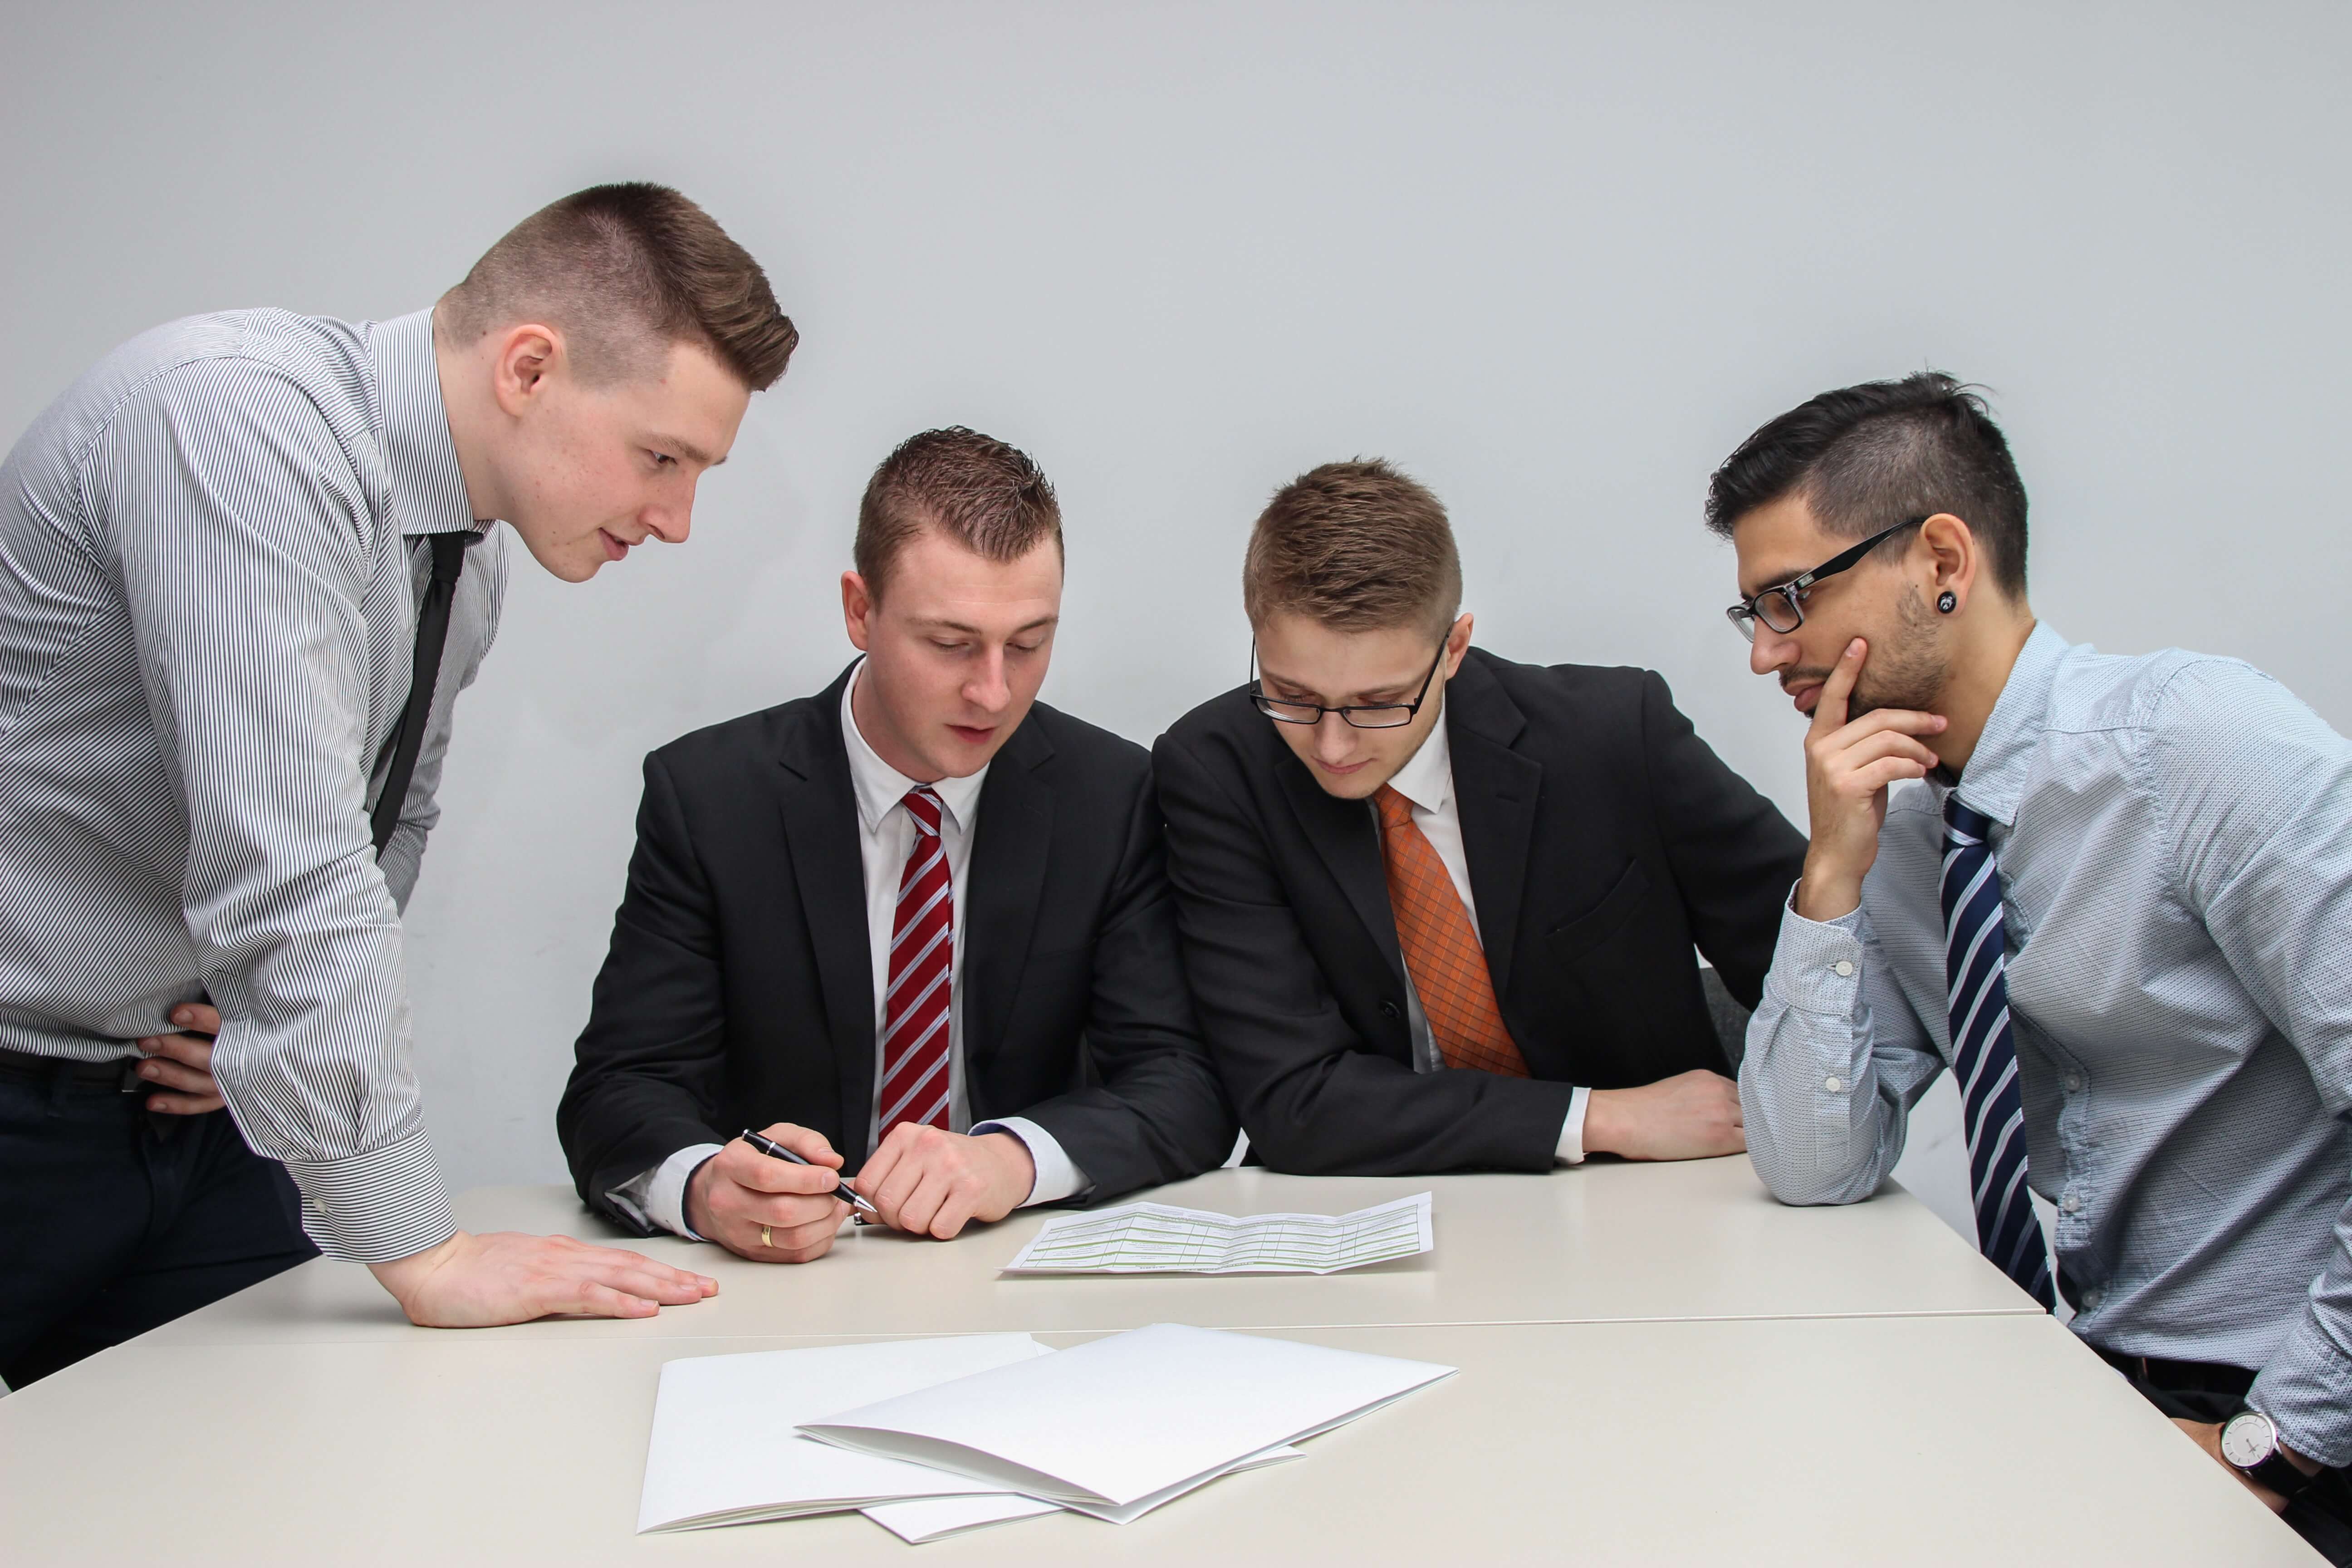 Four guys in business casual clothing at a meeting